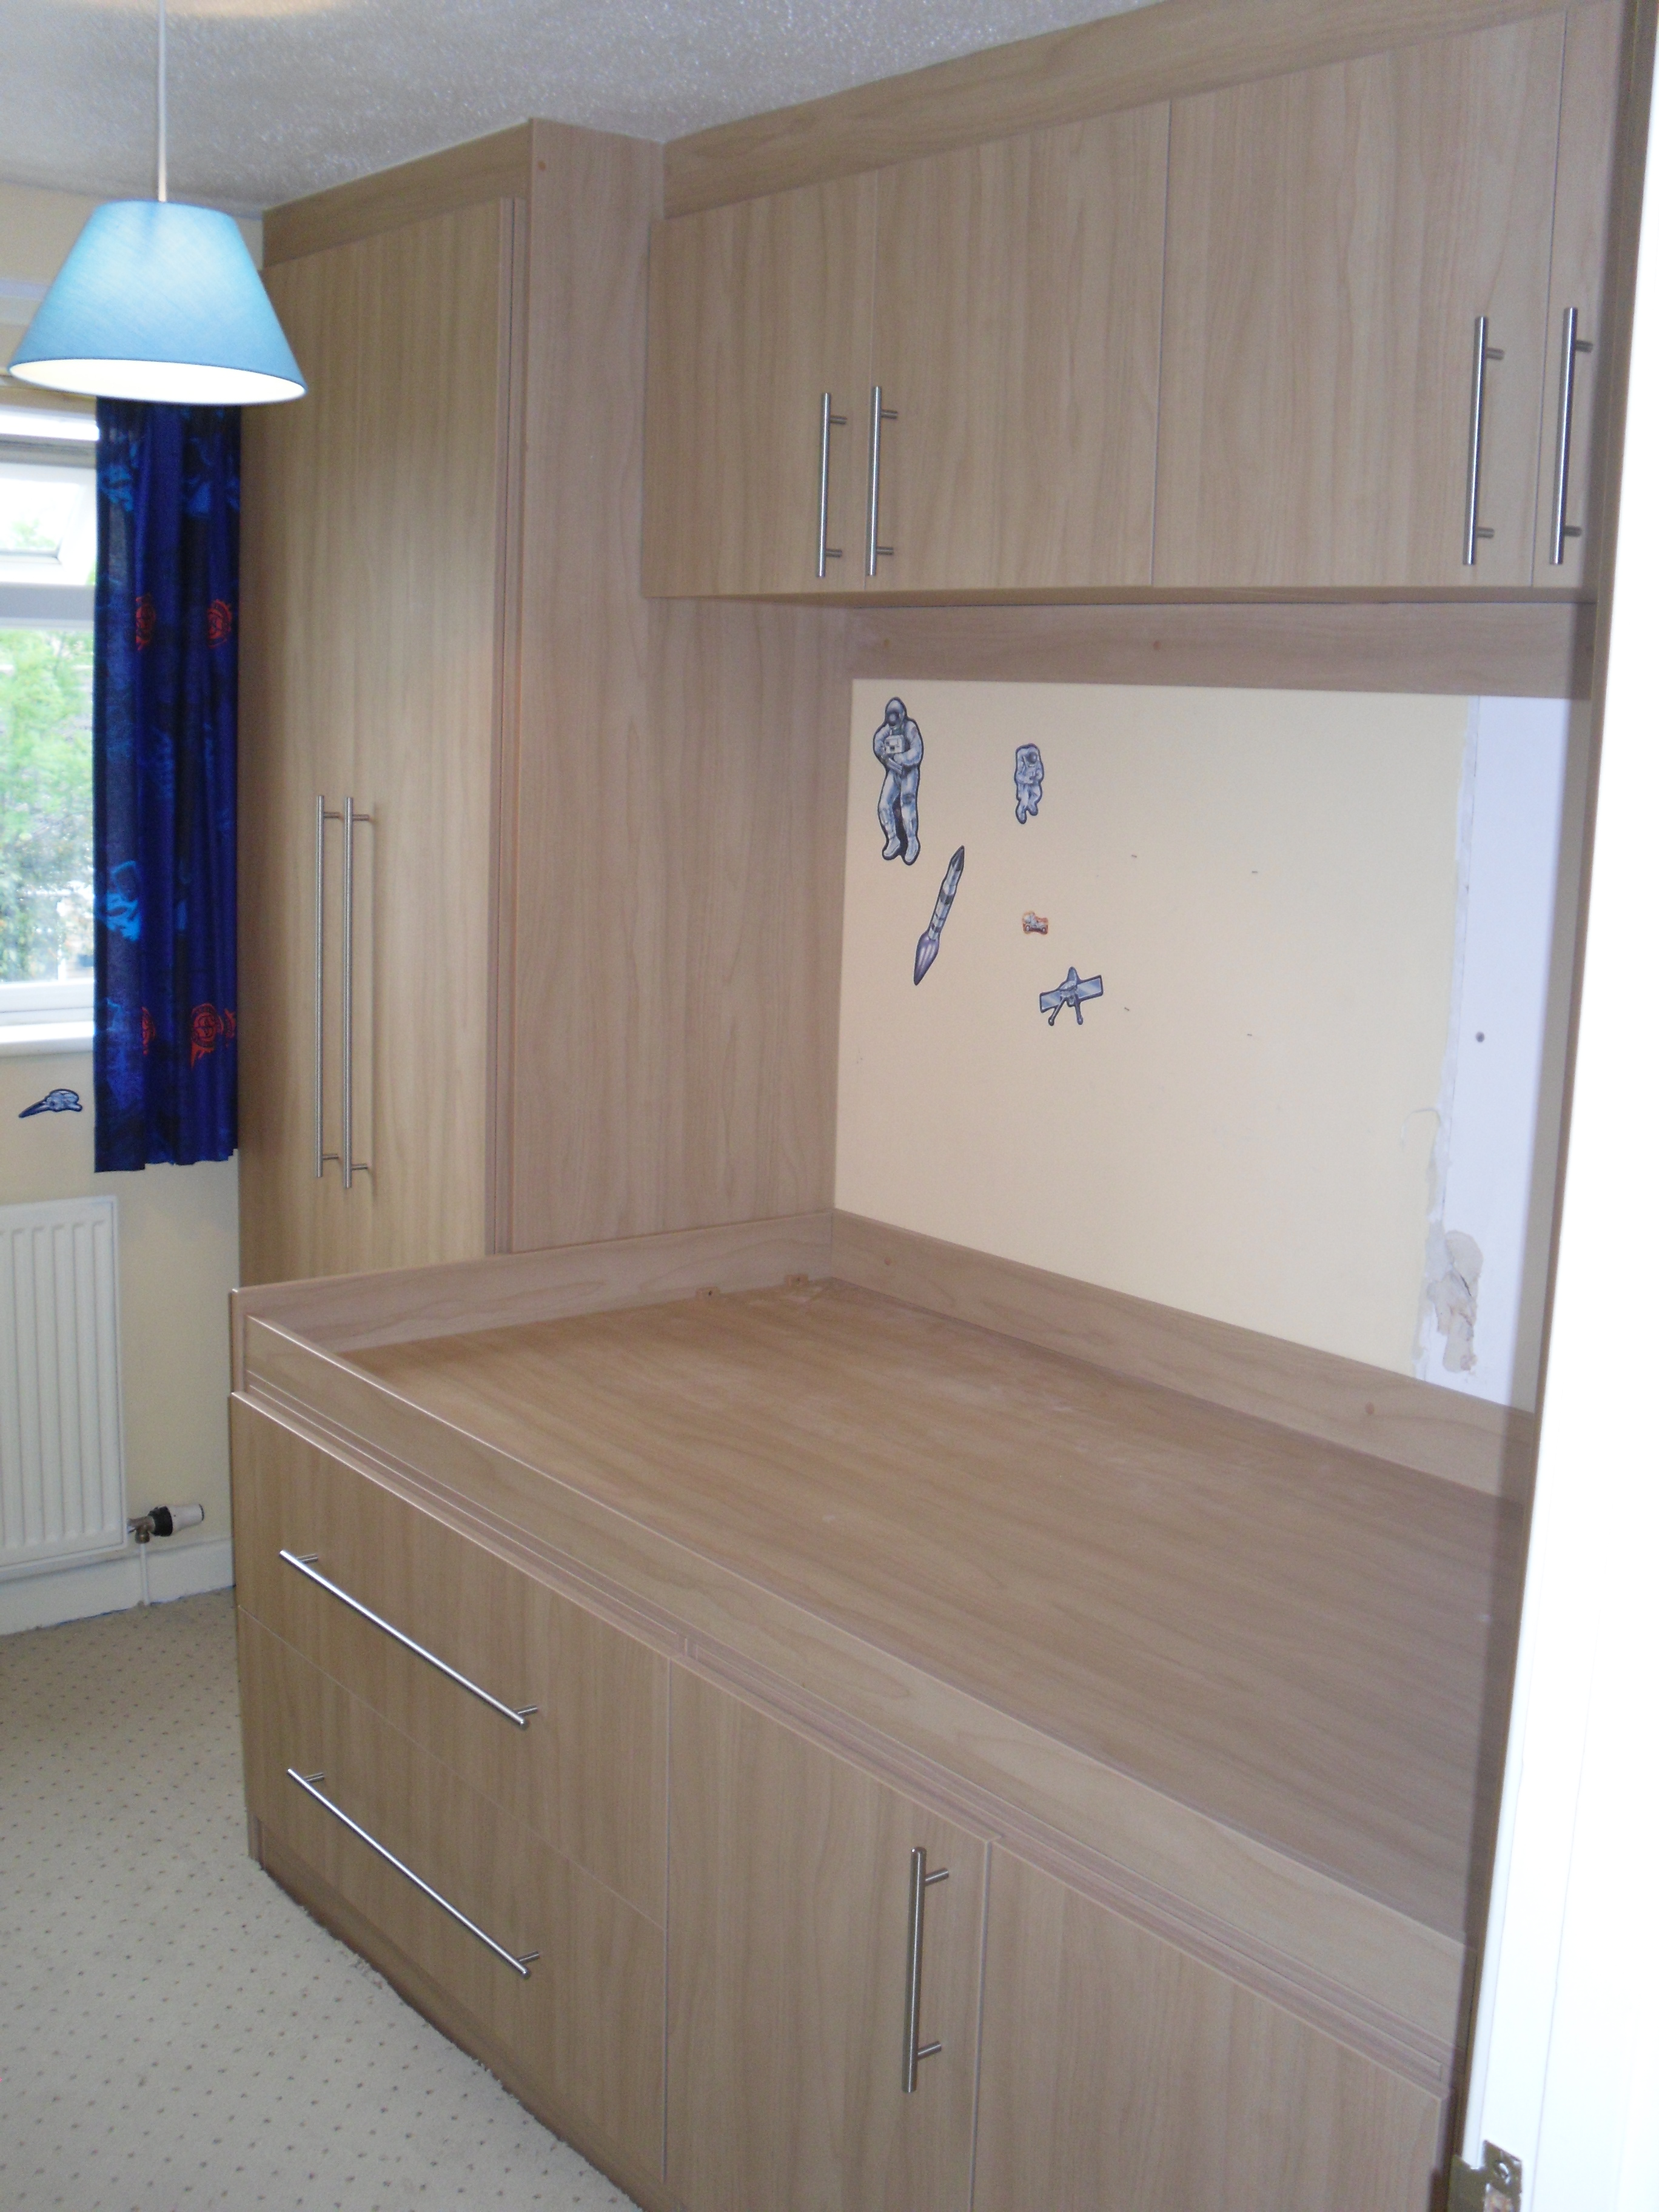 cabin bed with built in wardrobe